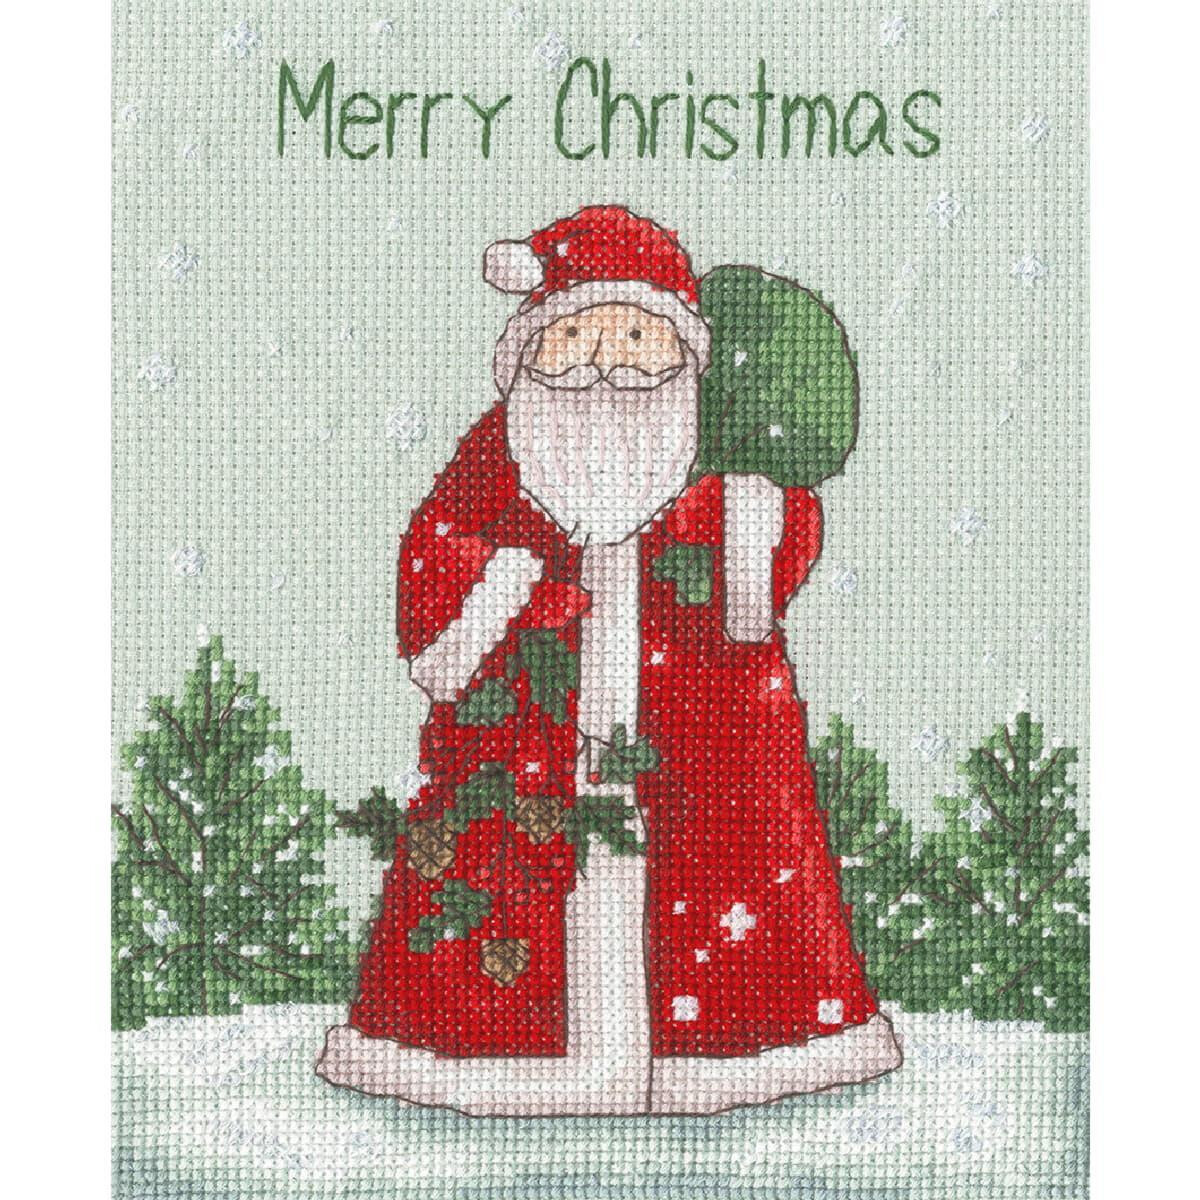 Cross-stitched picture of Santa Claus in a red robe...